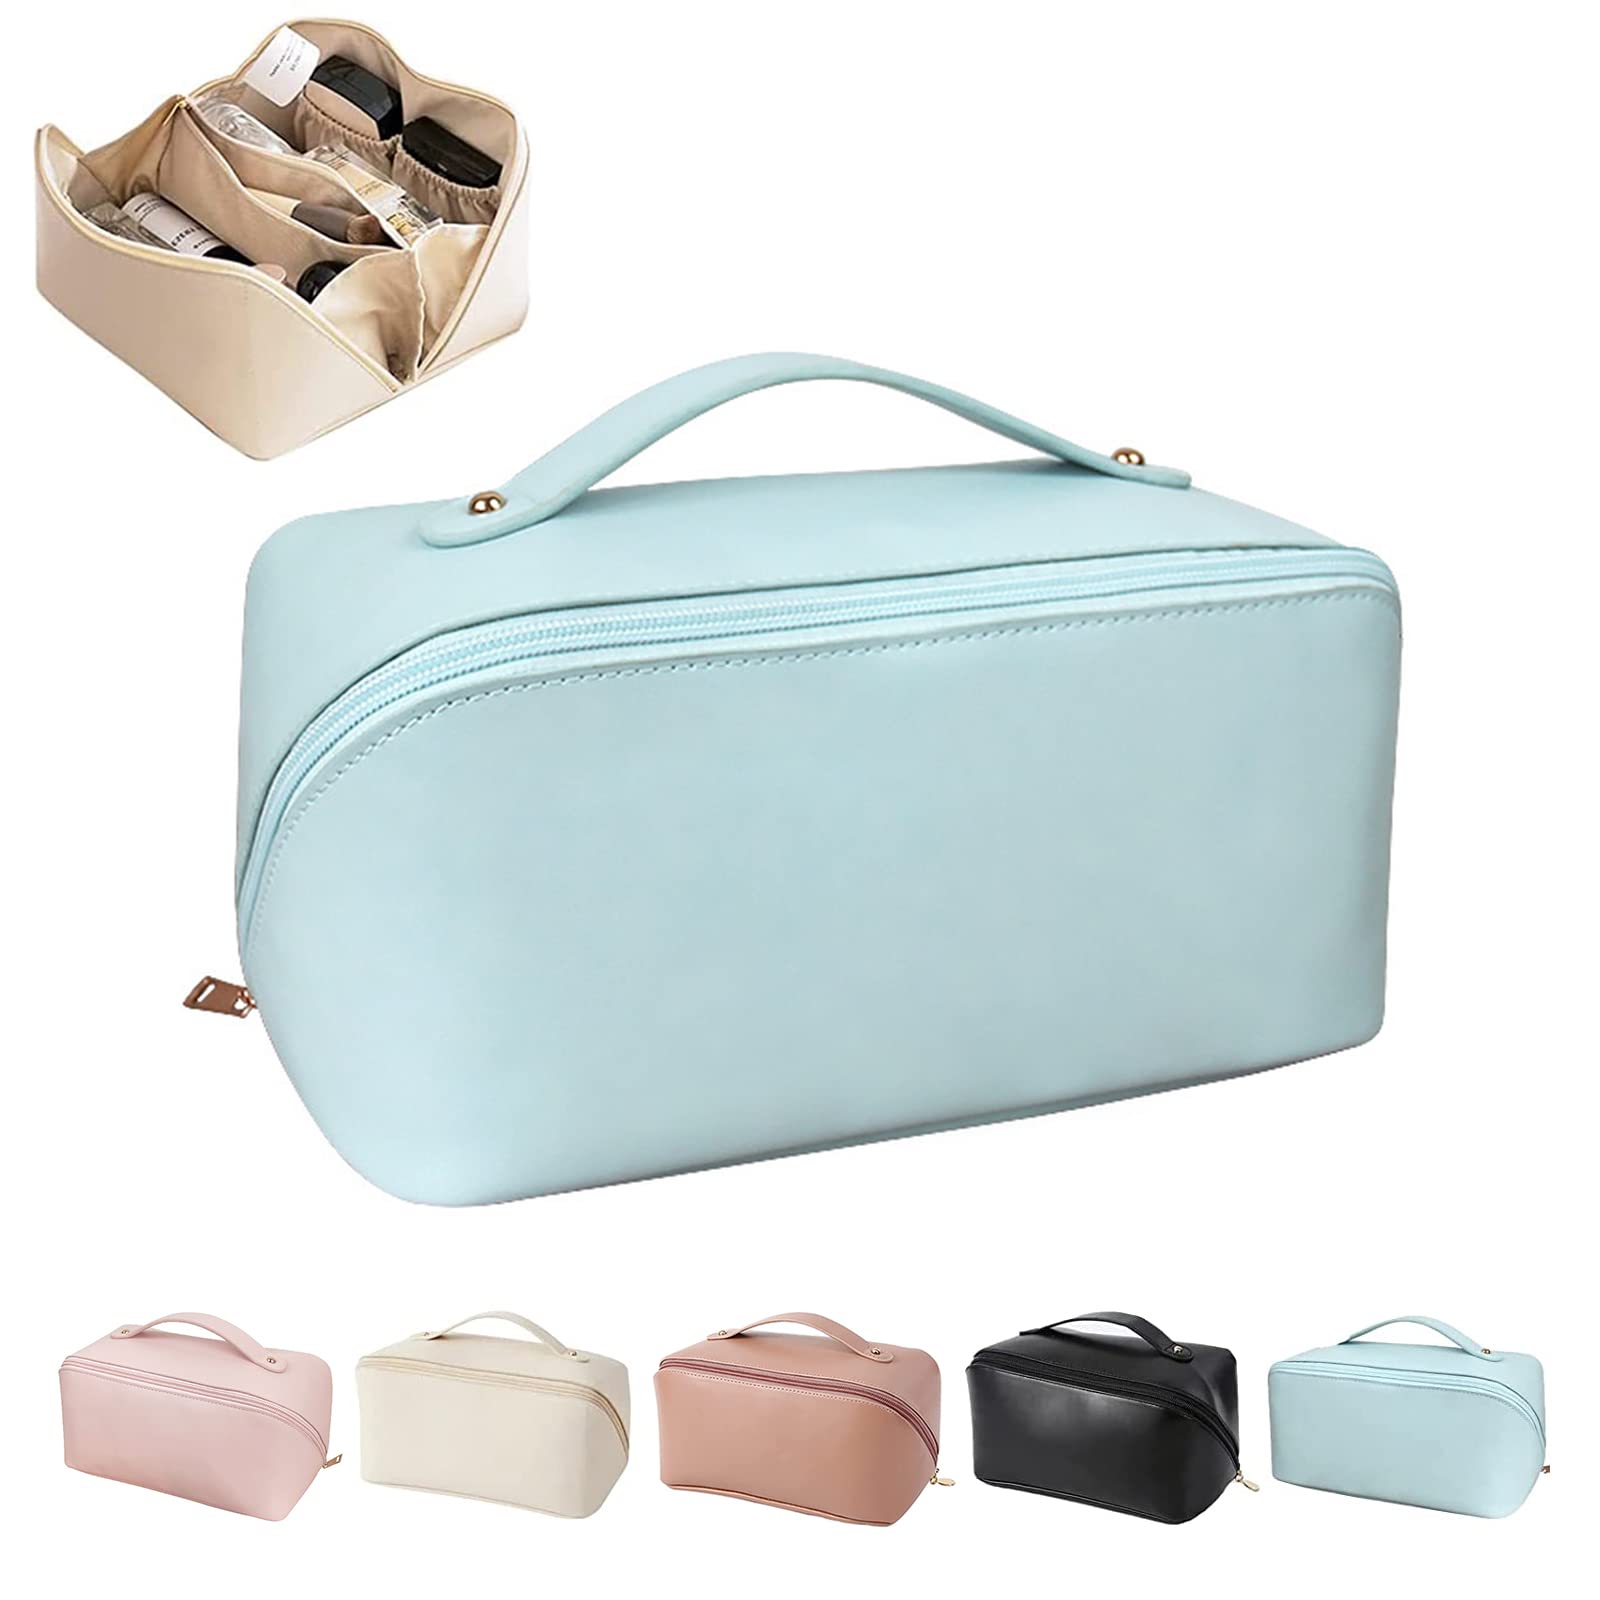 Waterproof Leather Makeup Bag Zipper Pouch Travel Cosmetic